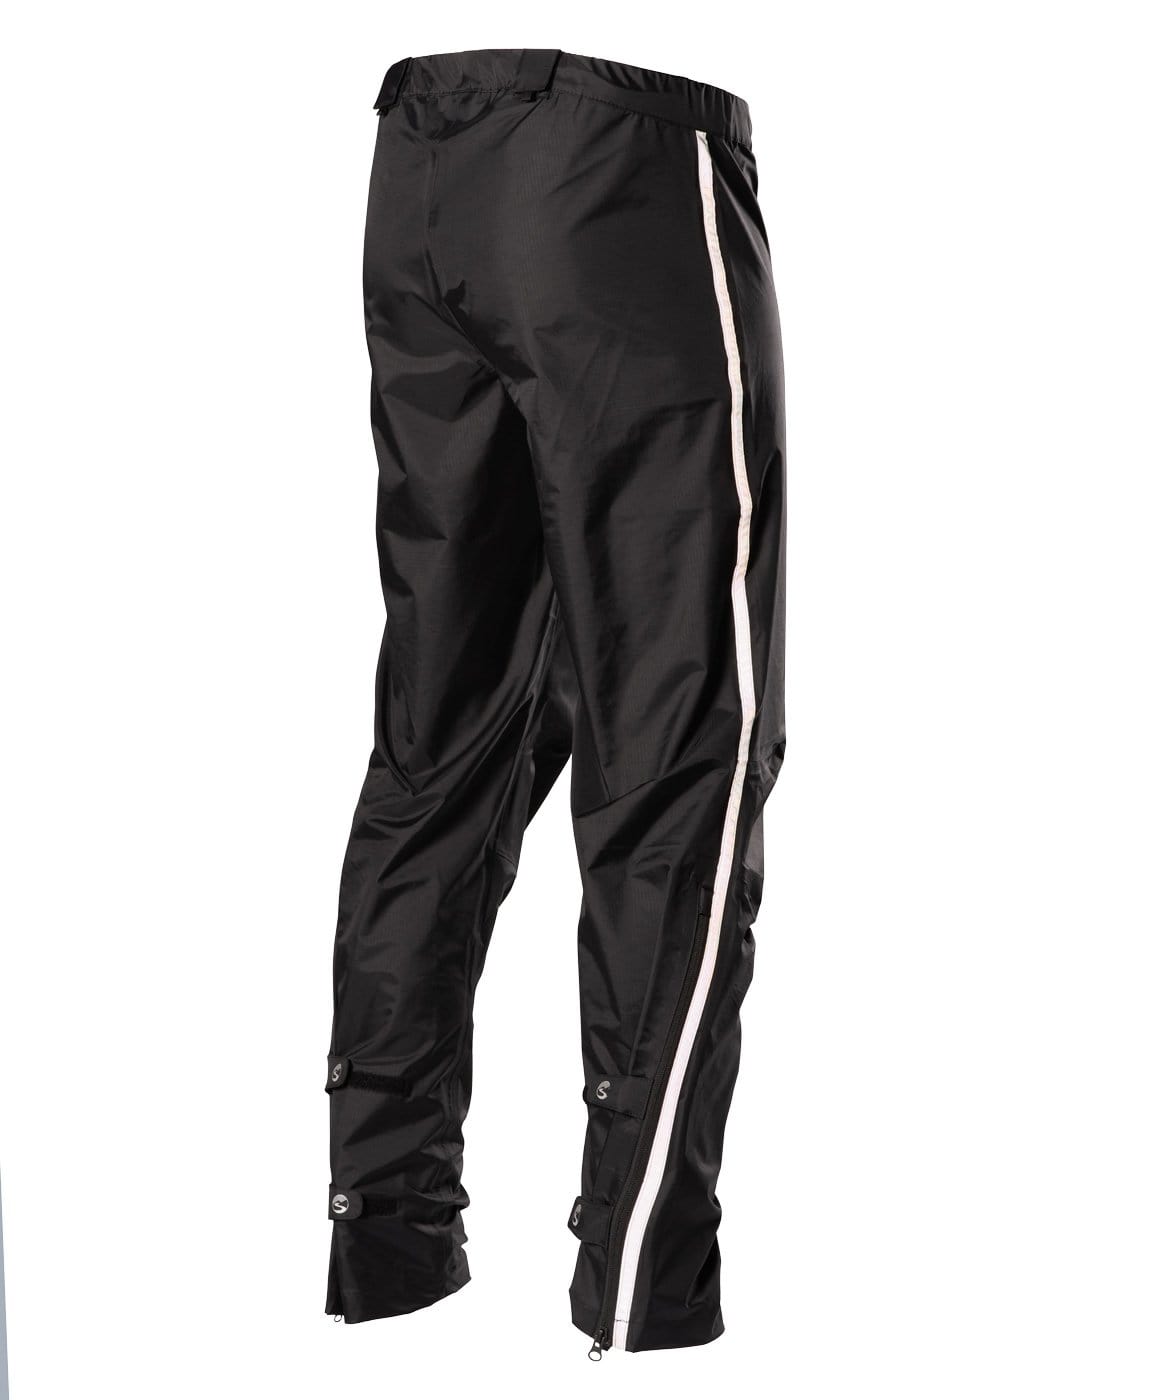 Packable Safety Rain Pant - Safety Supplies Canada